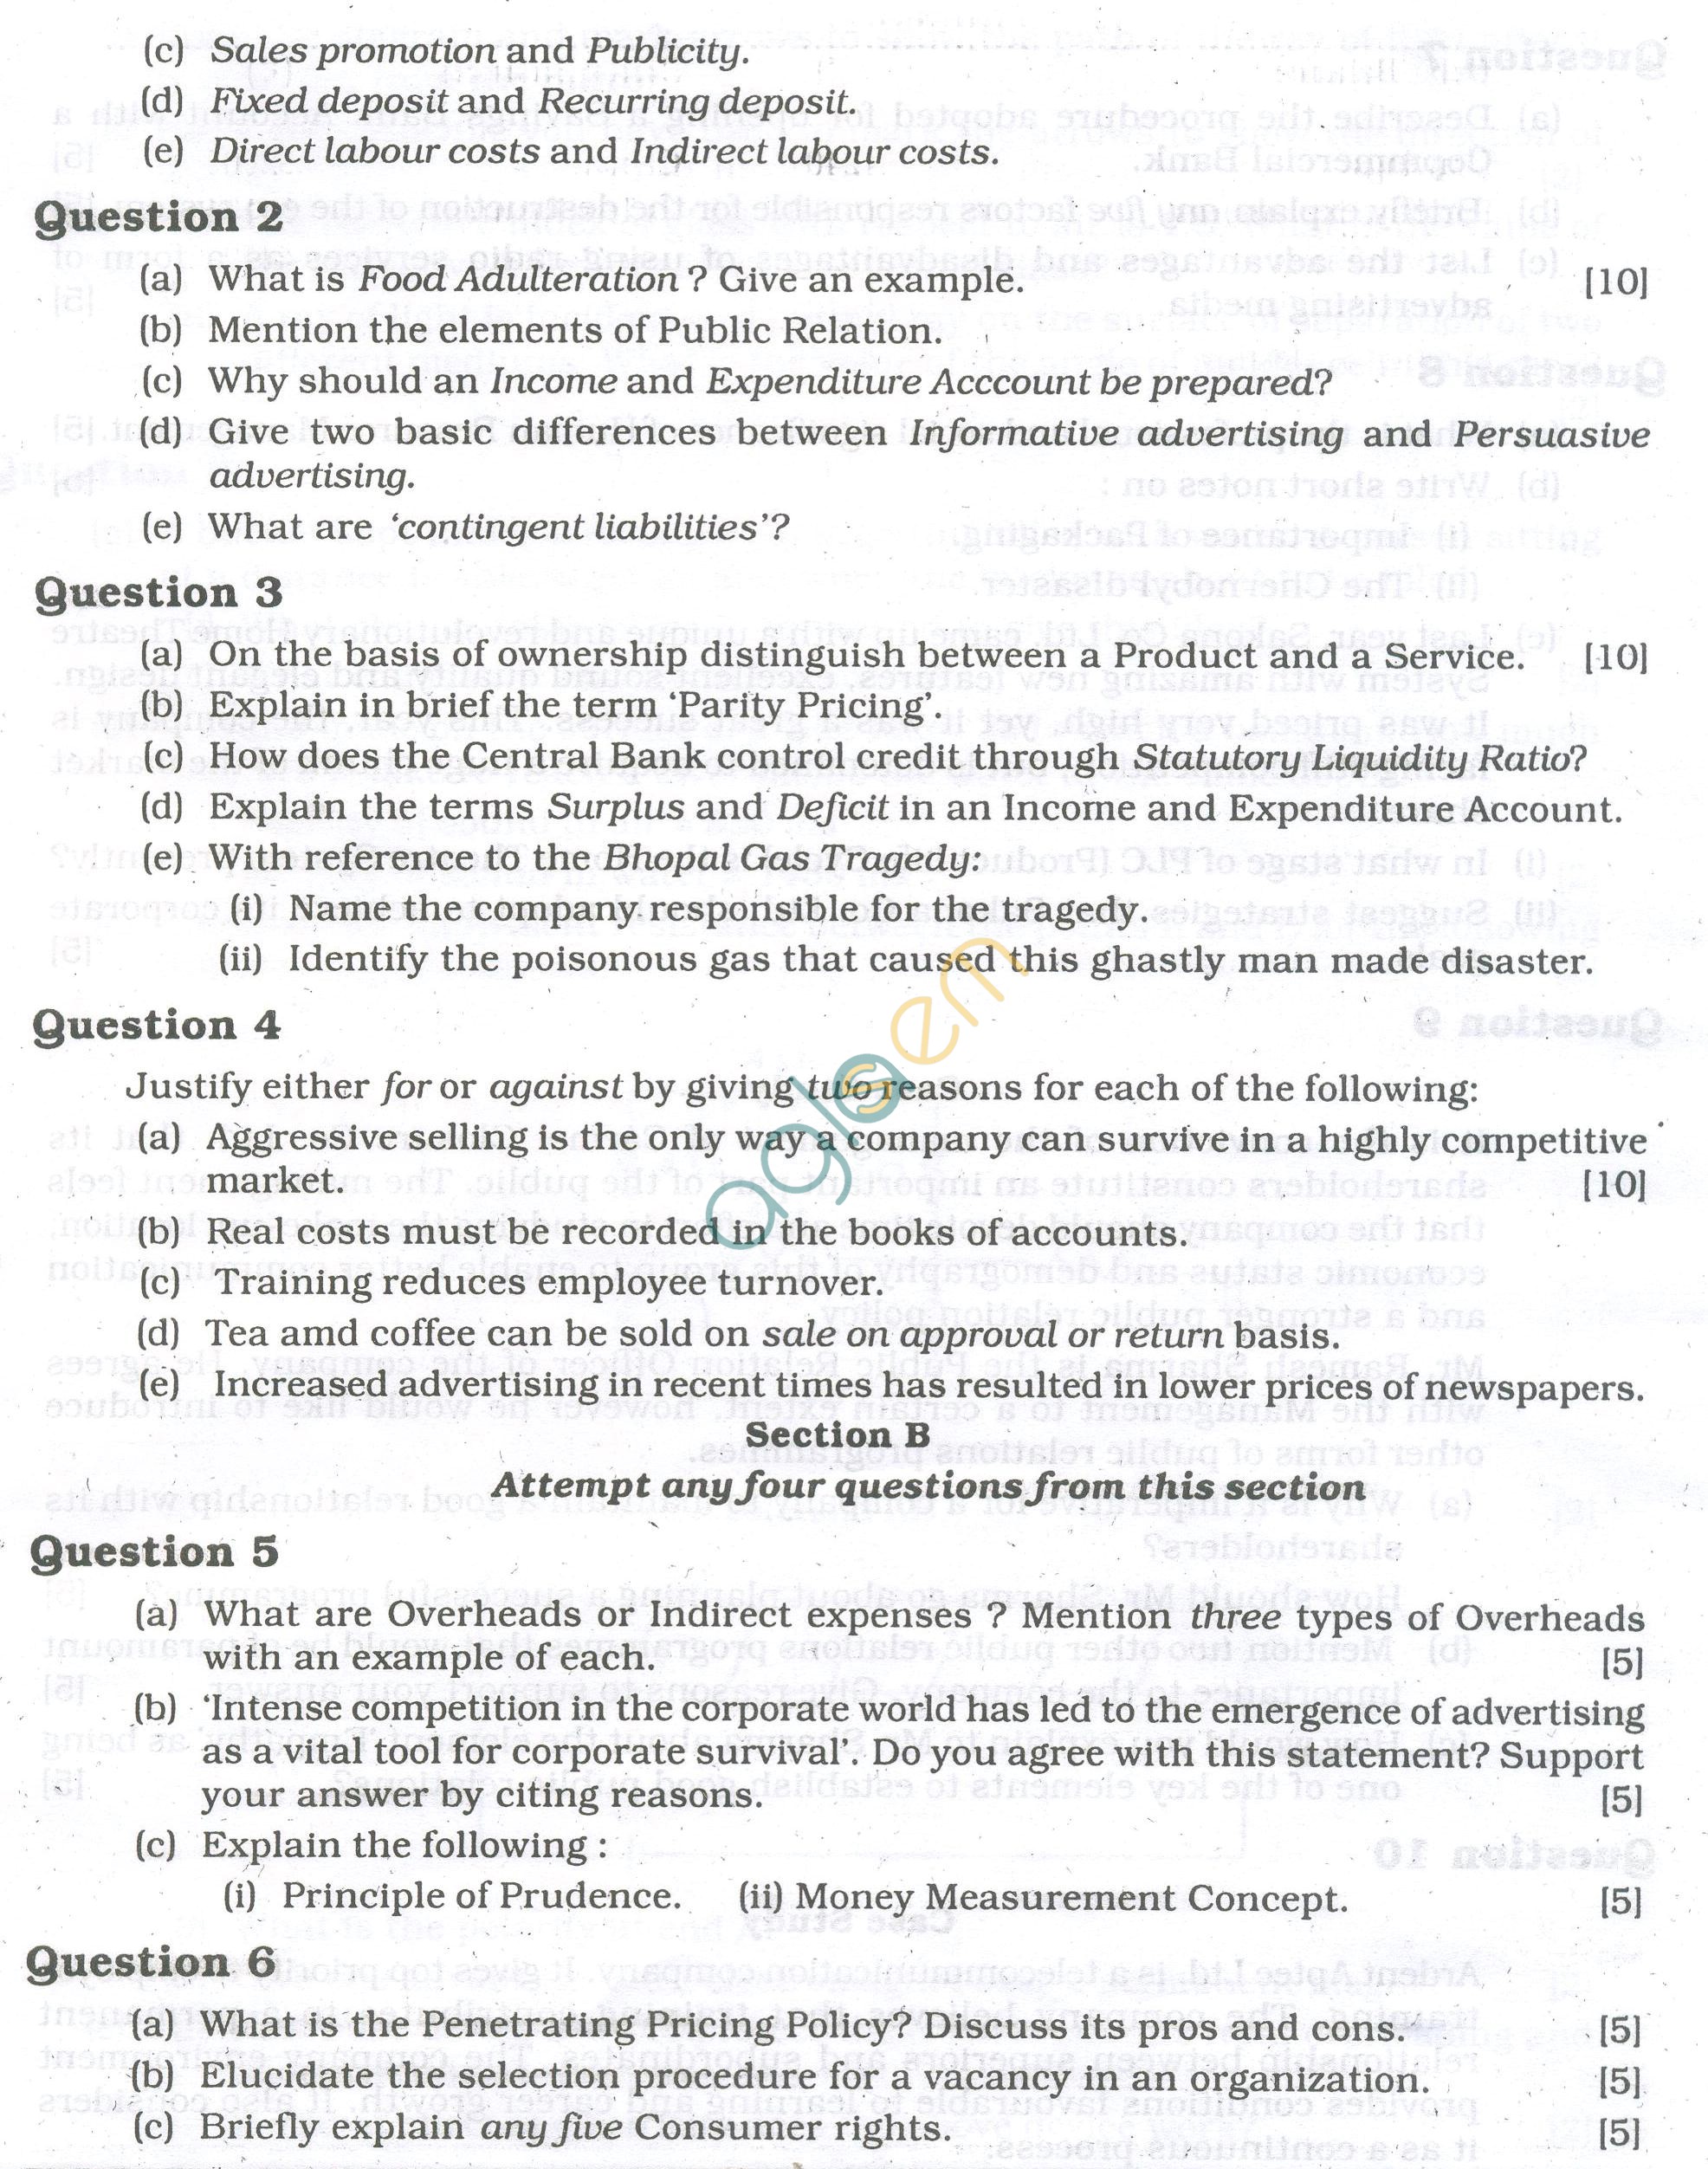 ICSE Question Papers 2013 for Class 10 - Commercial Applications/